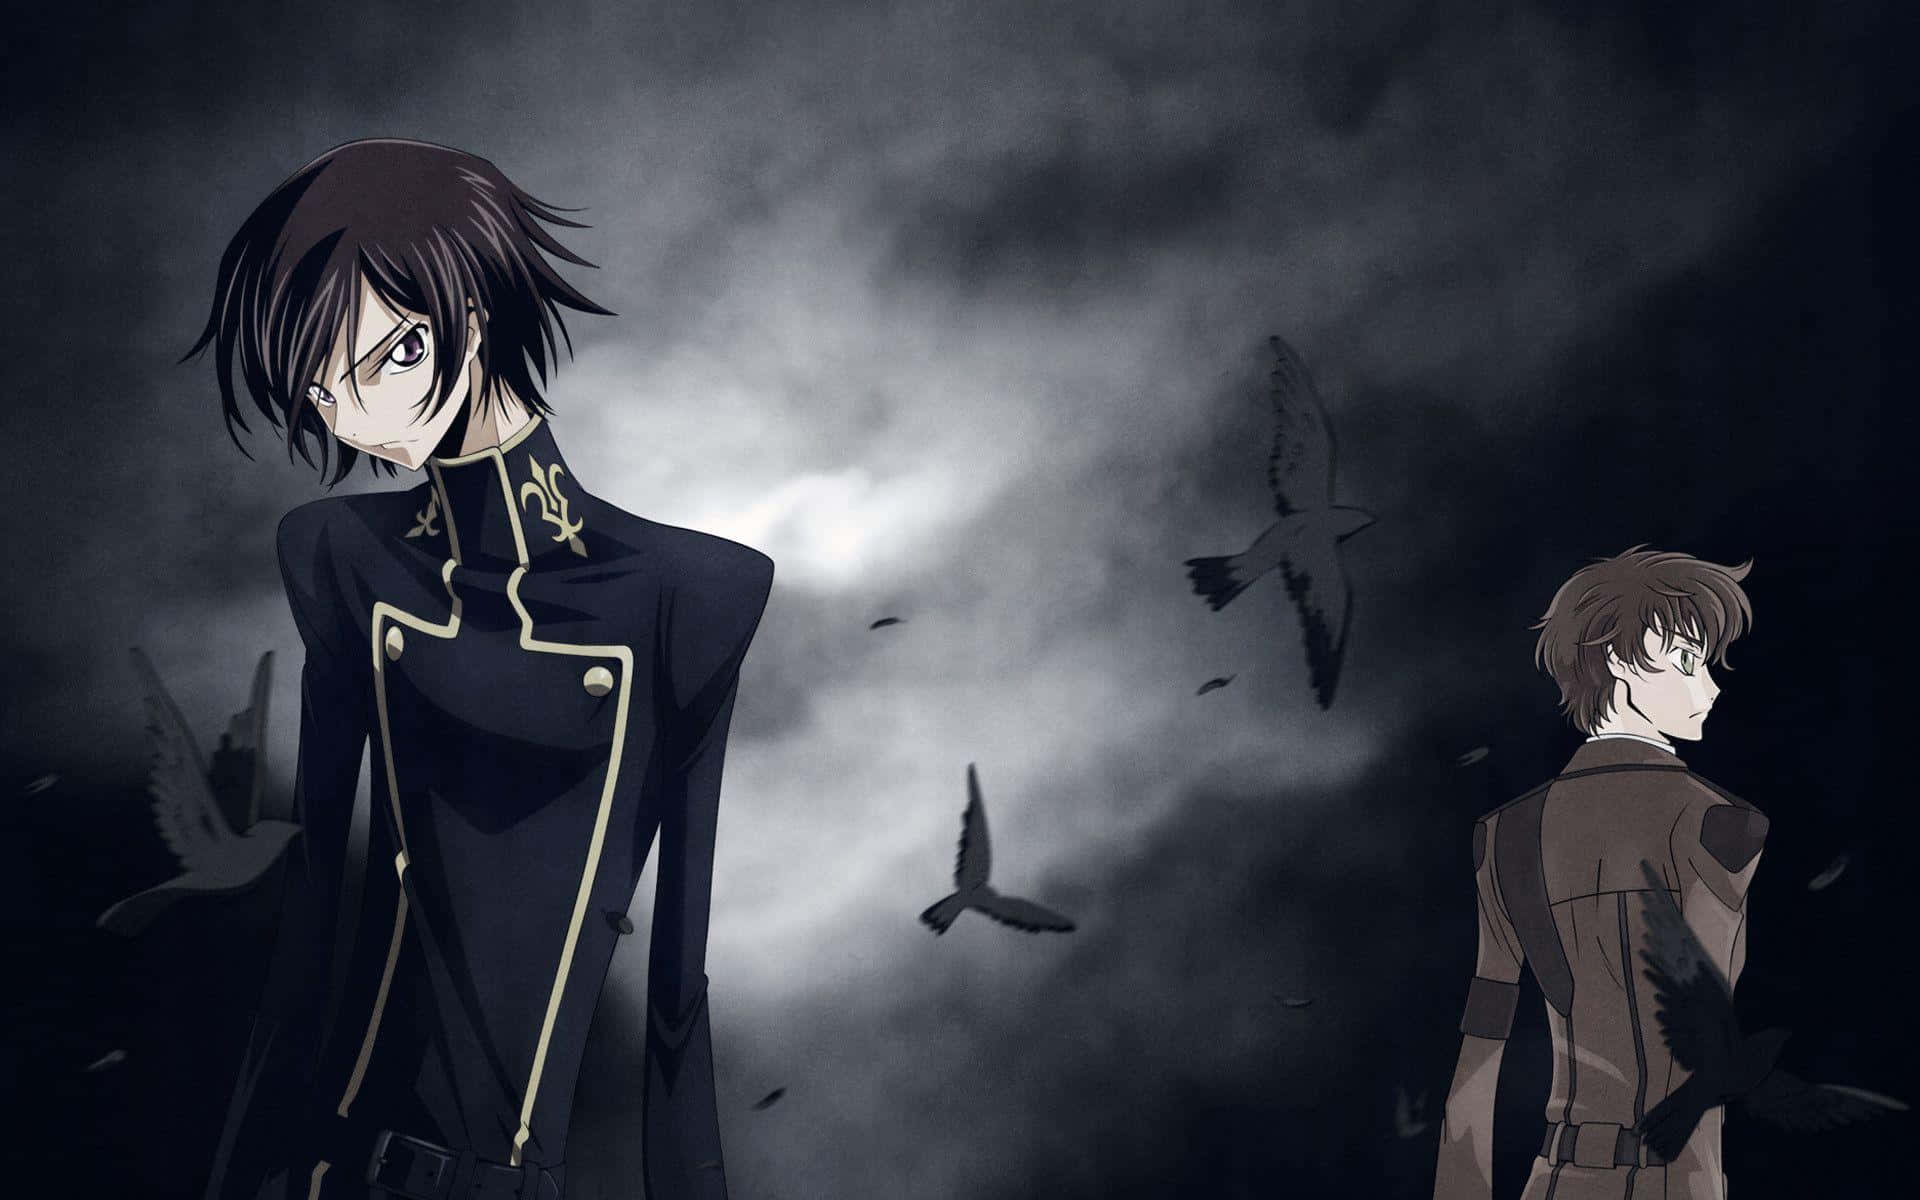 C.C. is a symbol of hope in the dystopian world of Code Geass